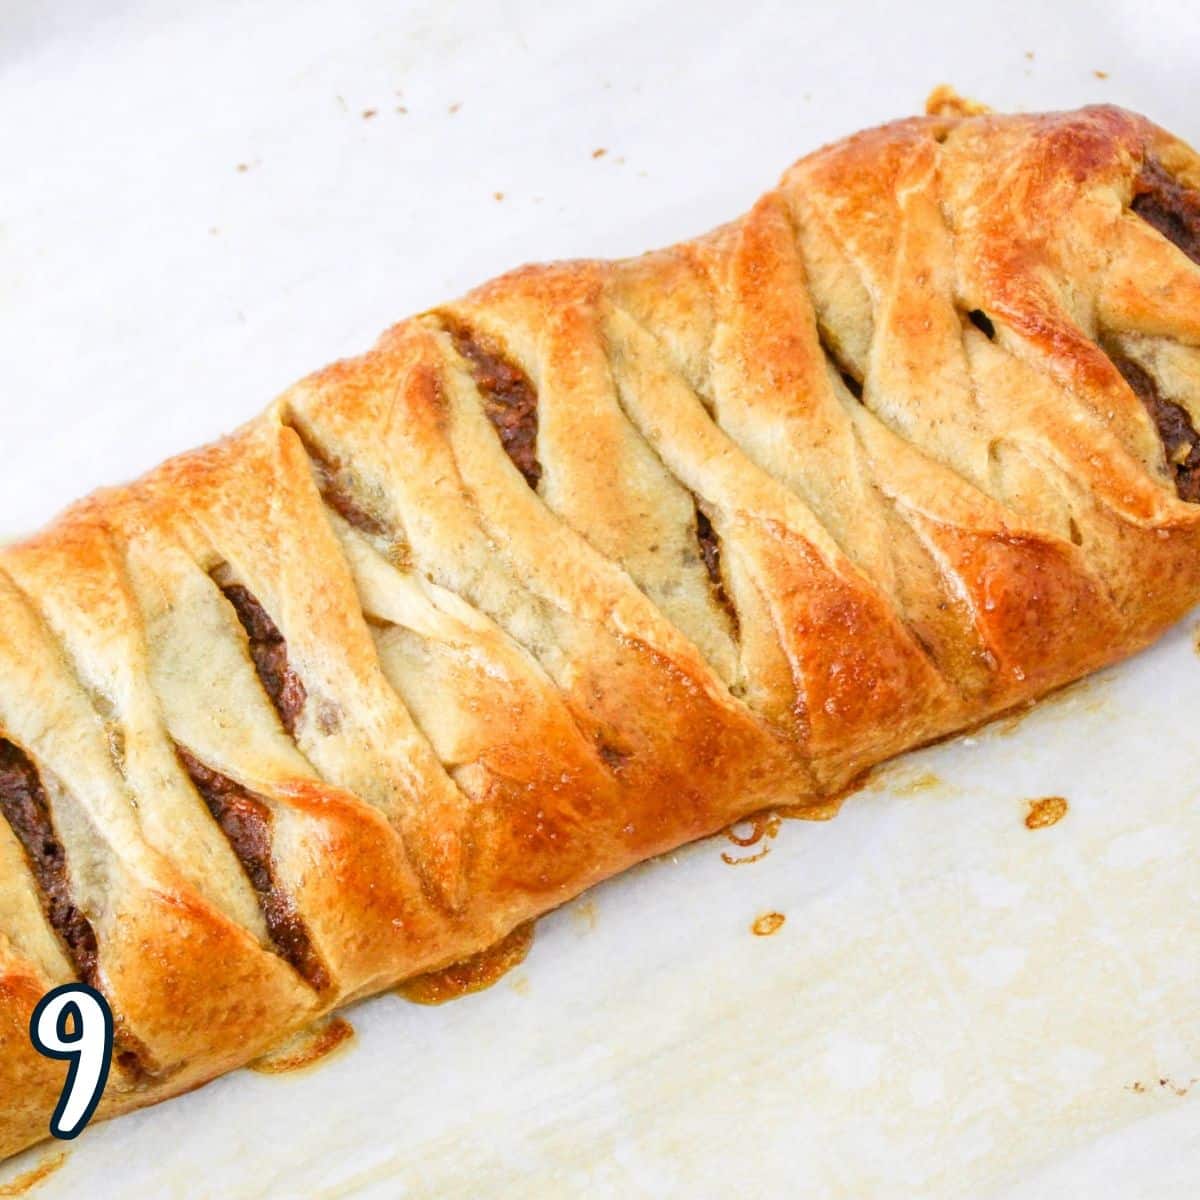 A golden brown, just baked pastry braid filled with pumpkin. 